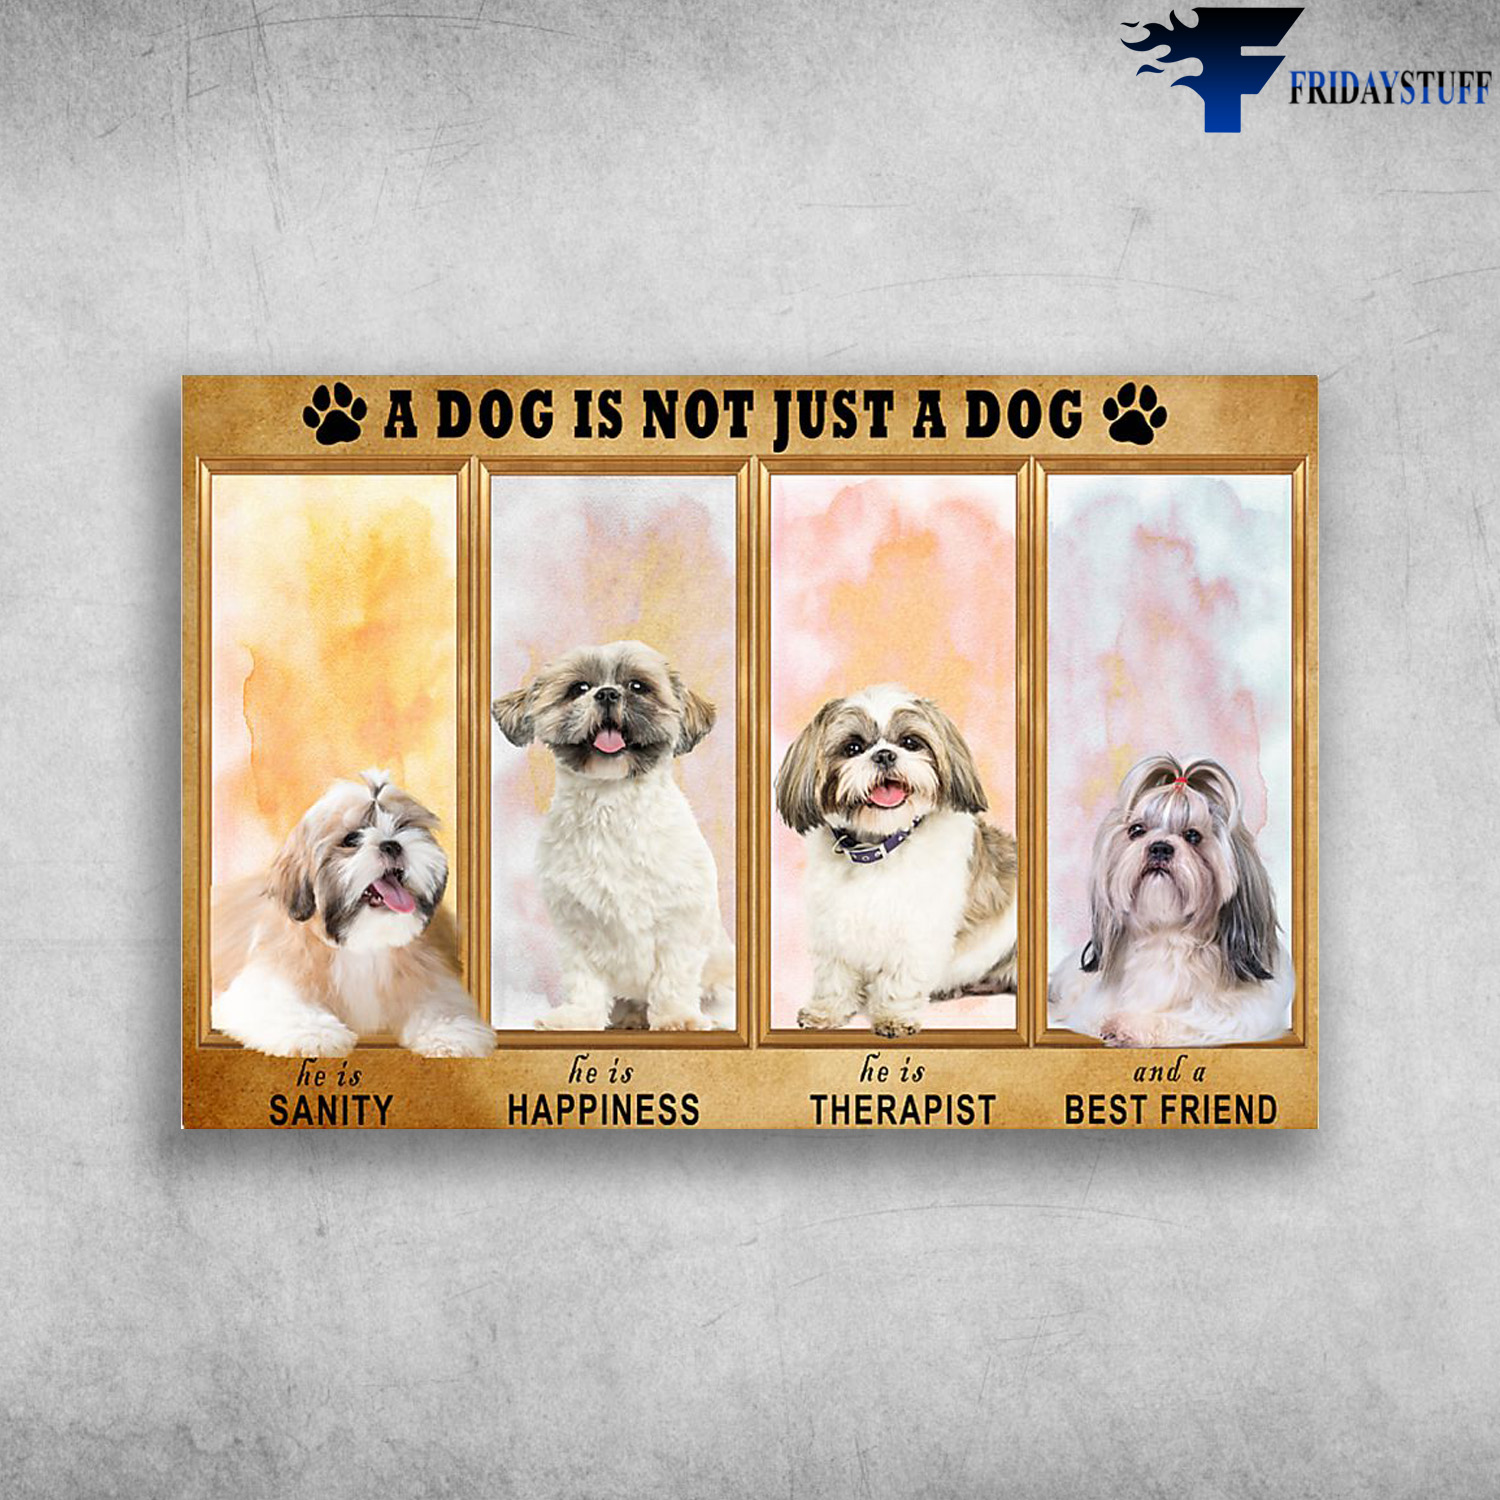 Shih Tzu - A Dog Is Not Just A Dog, He Is Sanity, He is Happiness, He Is Therapist, And A Best Friend